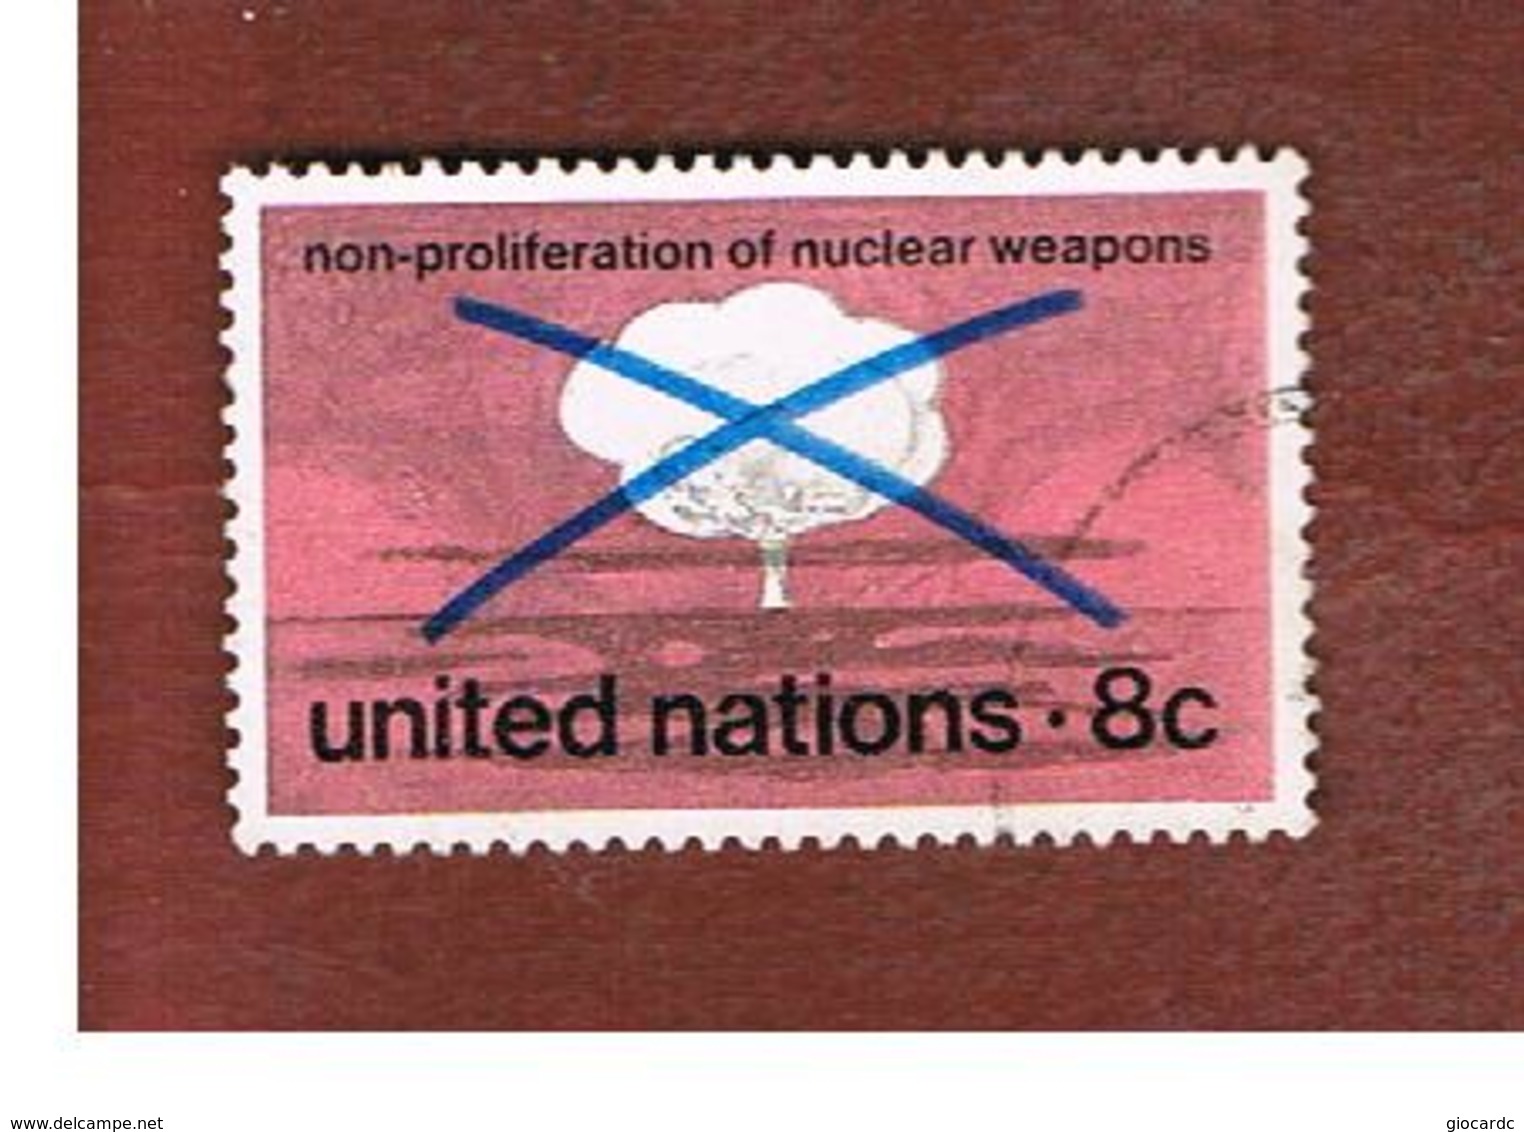 ONU (UNITED NATIONS) NEW YORK   - SG NY227   -  1972 NON-PROLIFERATION OF NUCLEAR   WEAPONS    - USED - Oblitérés